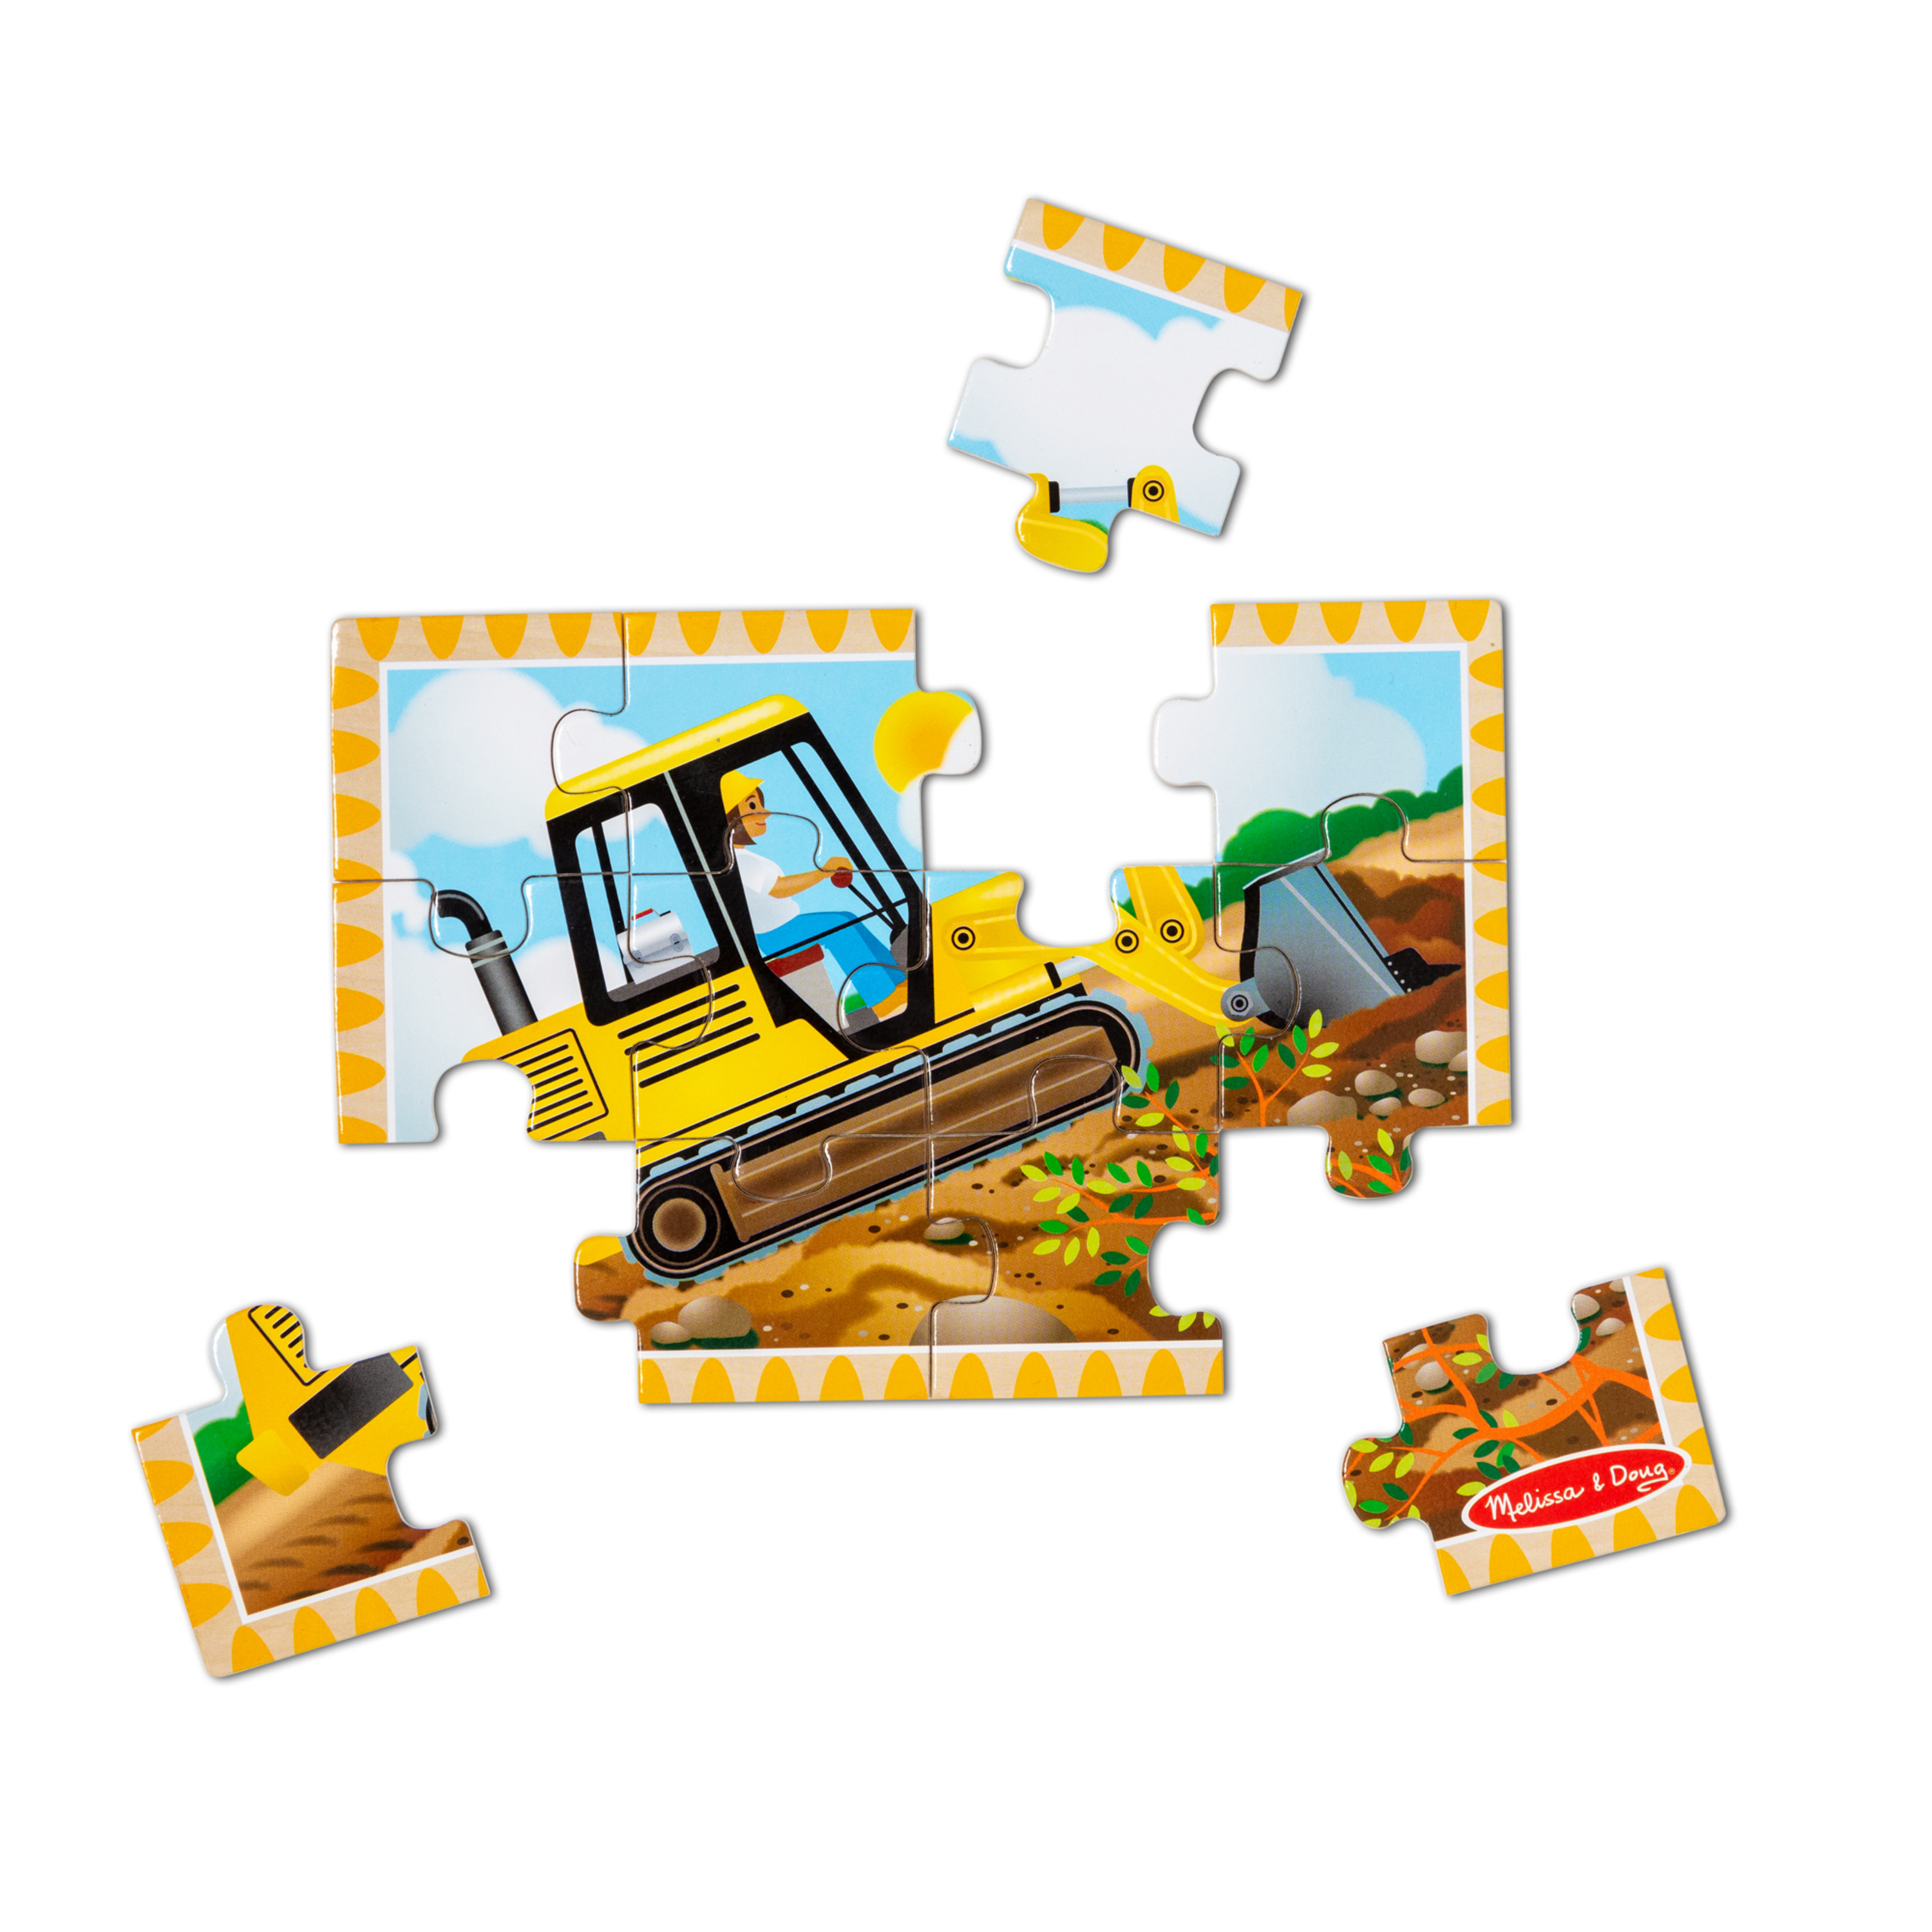 Melissa & Doug Construction Vehicles 4-in-1 Wooden Jigsaw Puzzles in a Box (48 pcs) - FSC Certified - image 5 of 10